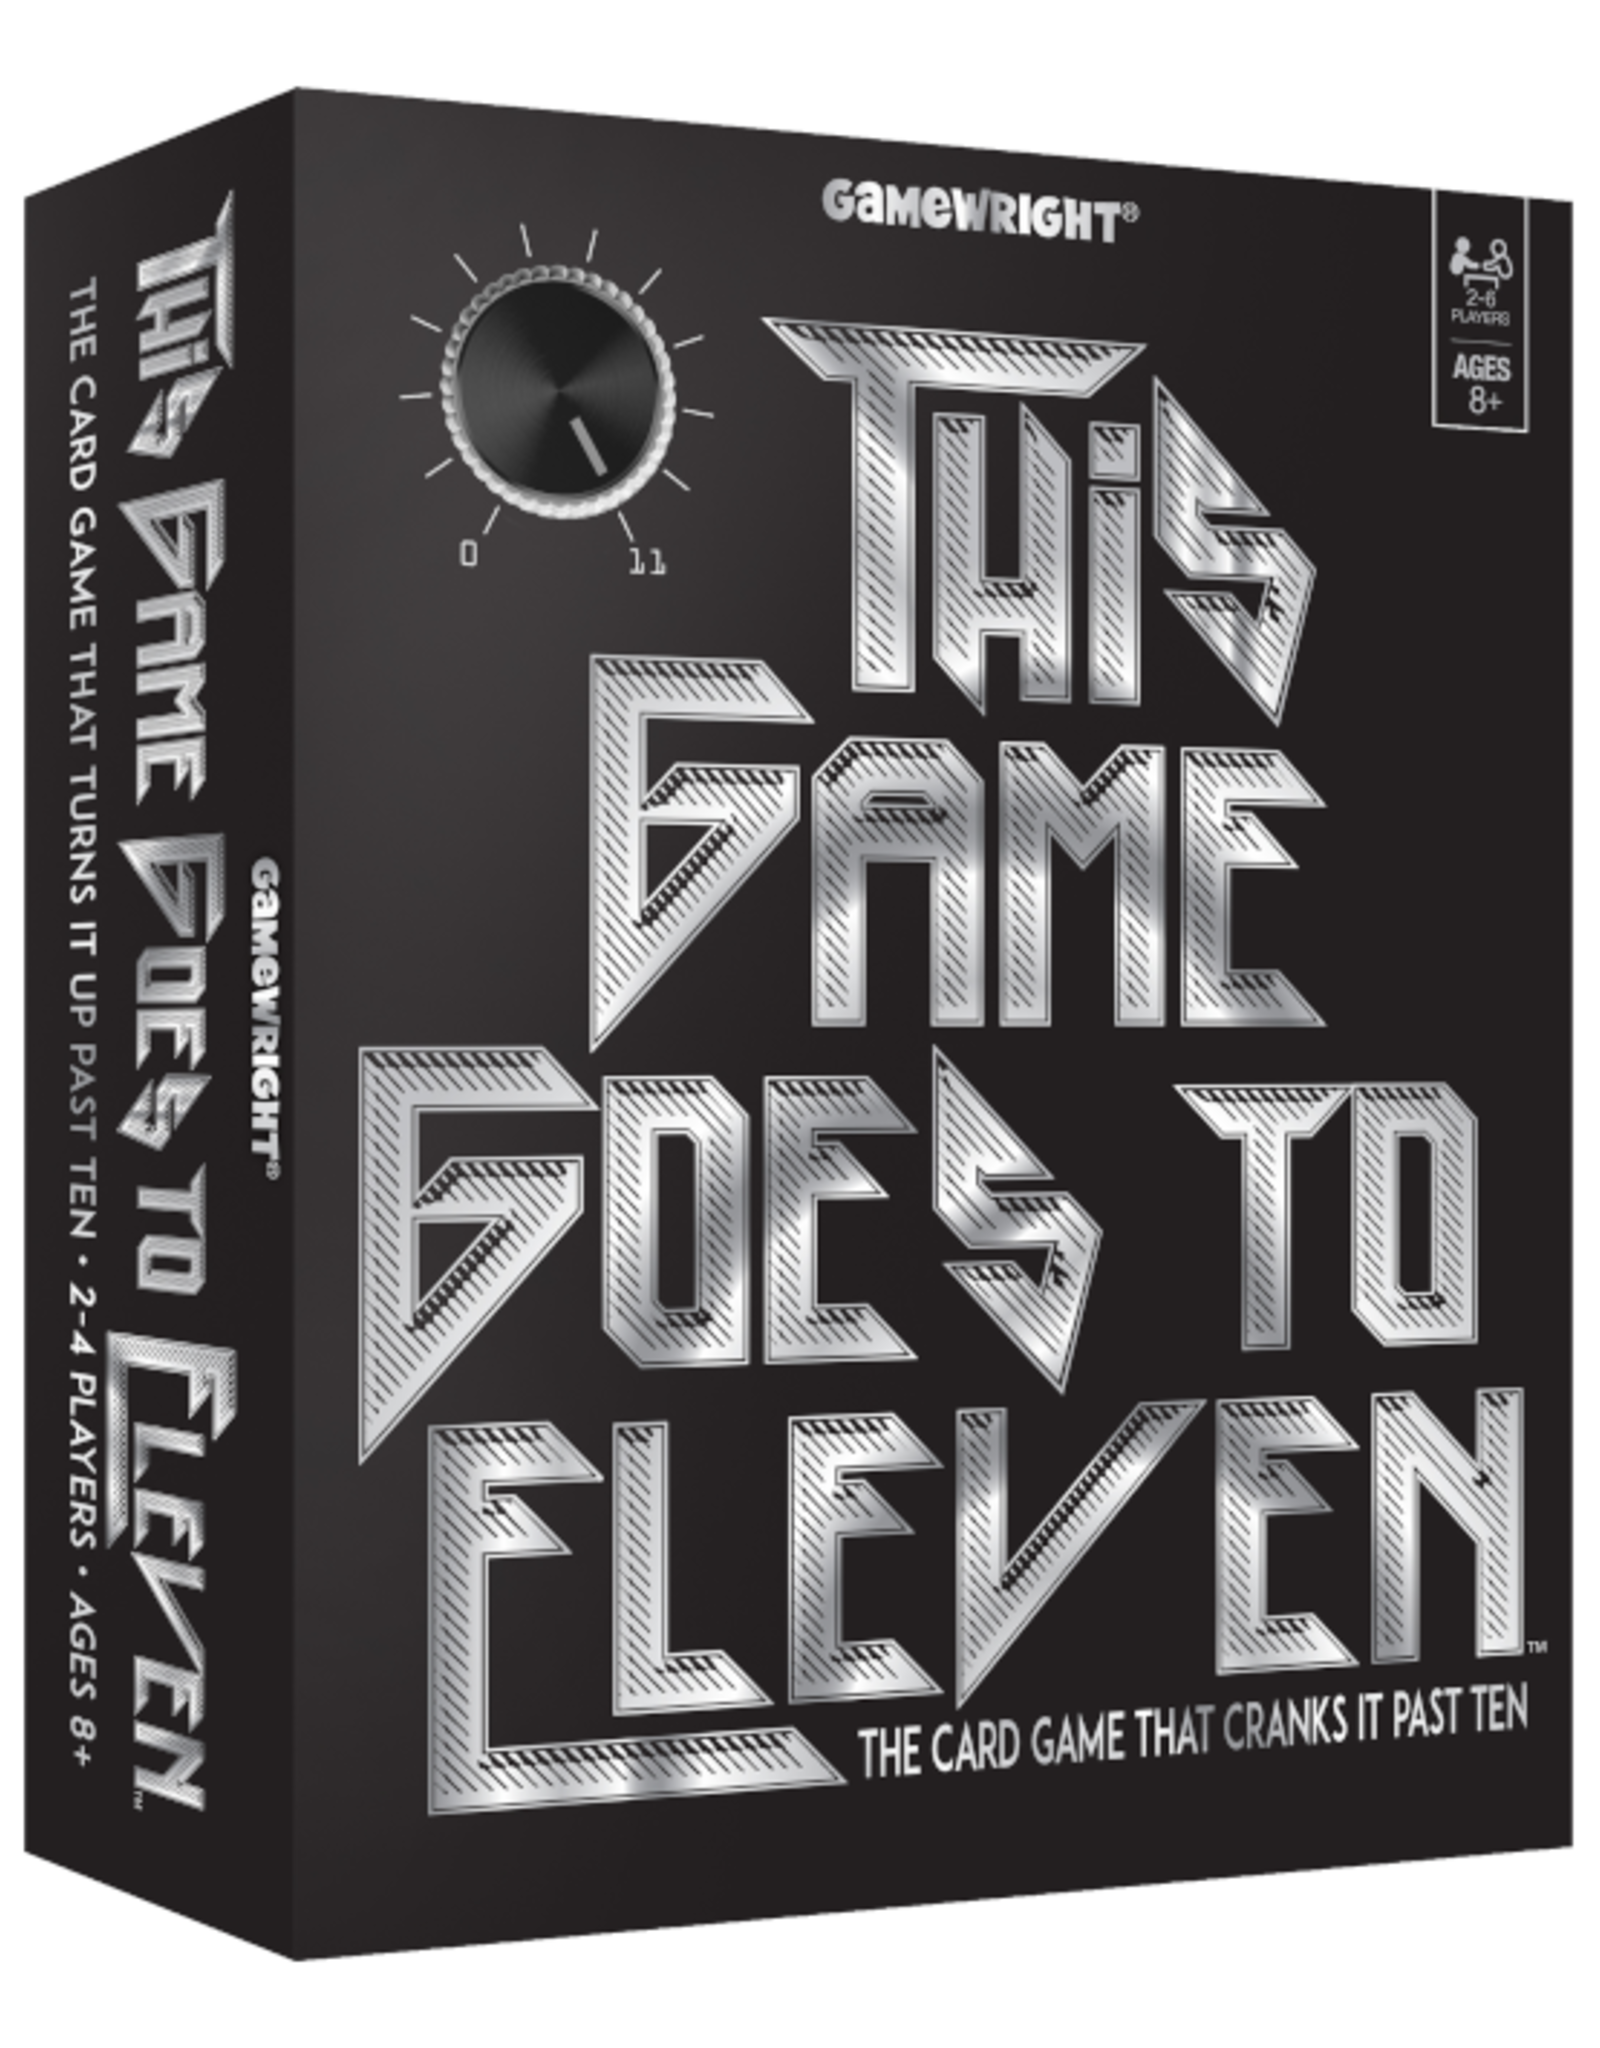 Gamewright Gamewright - This Game Goes to Eleven